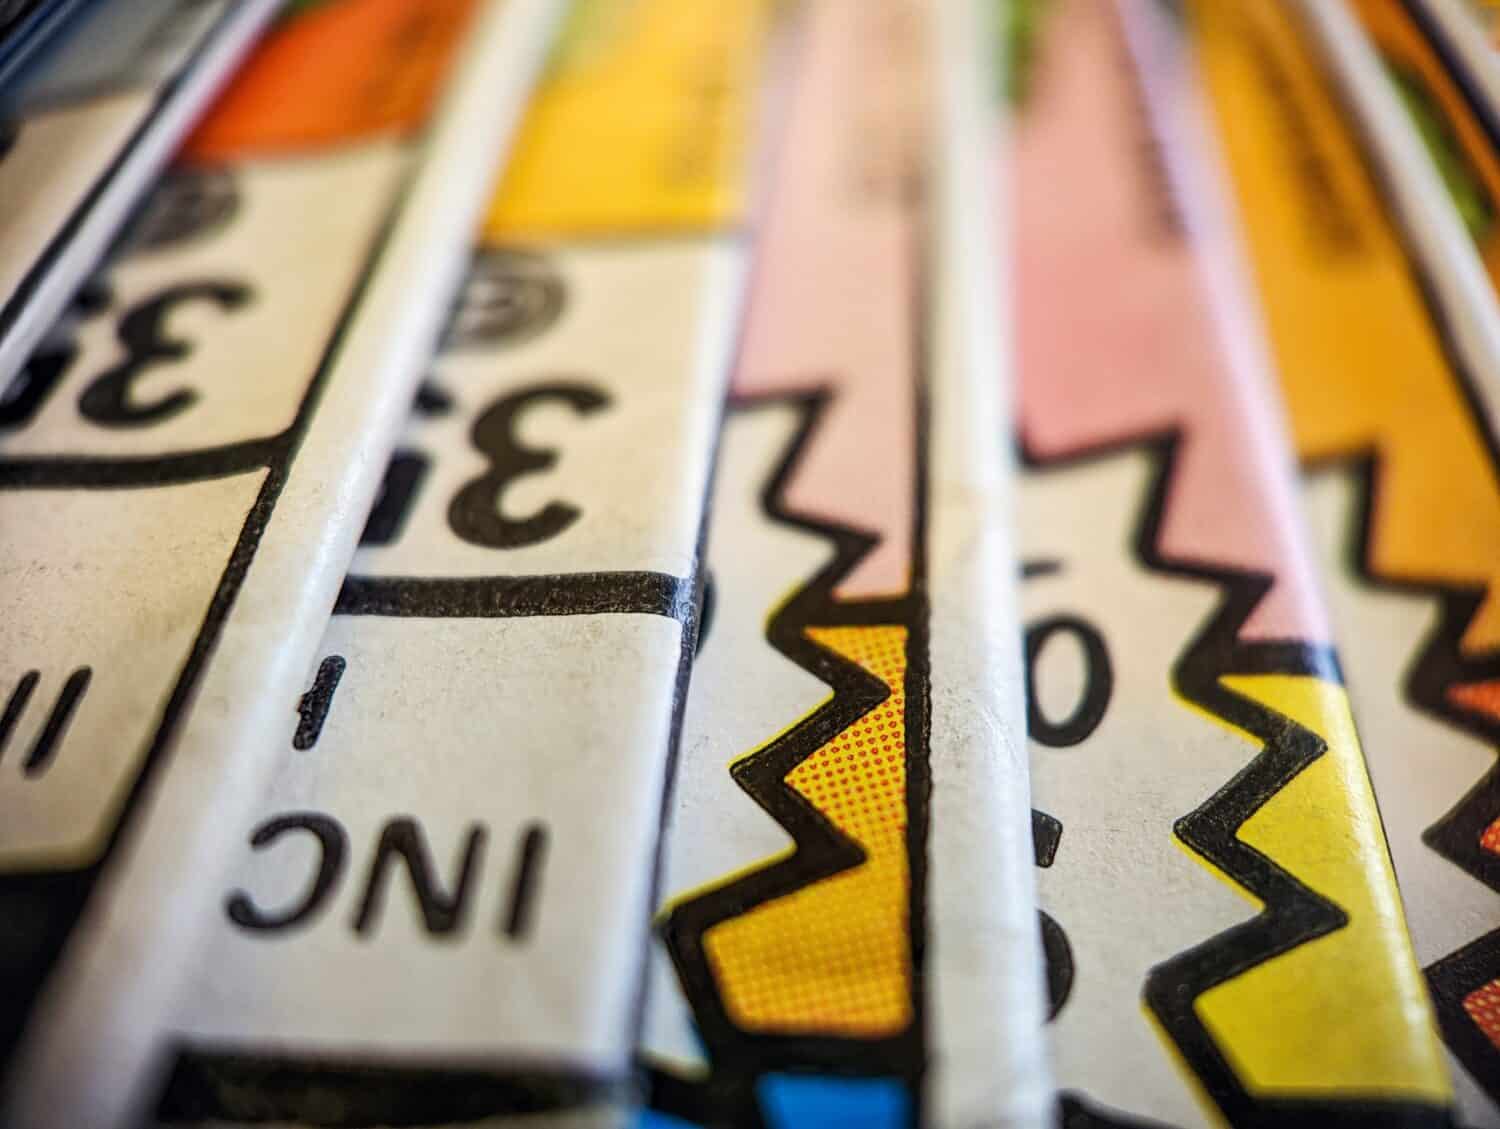 Closeup view of an old comic book collection stacked in a pile creates a colorful background paper texture with abstract shapes